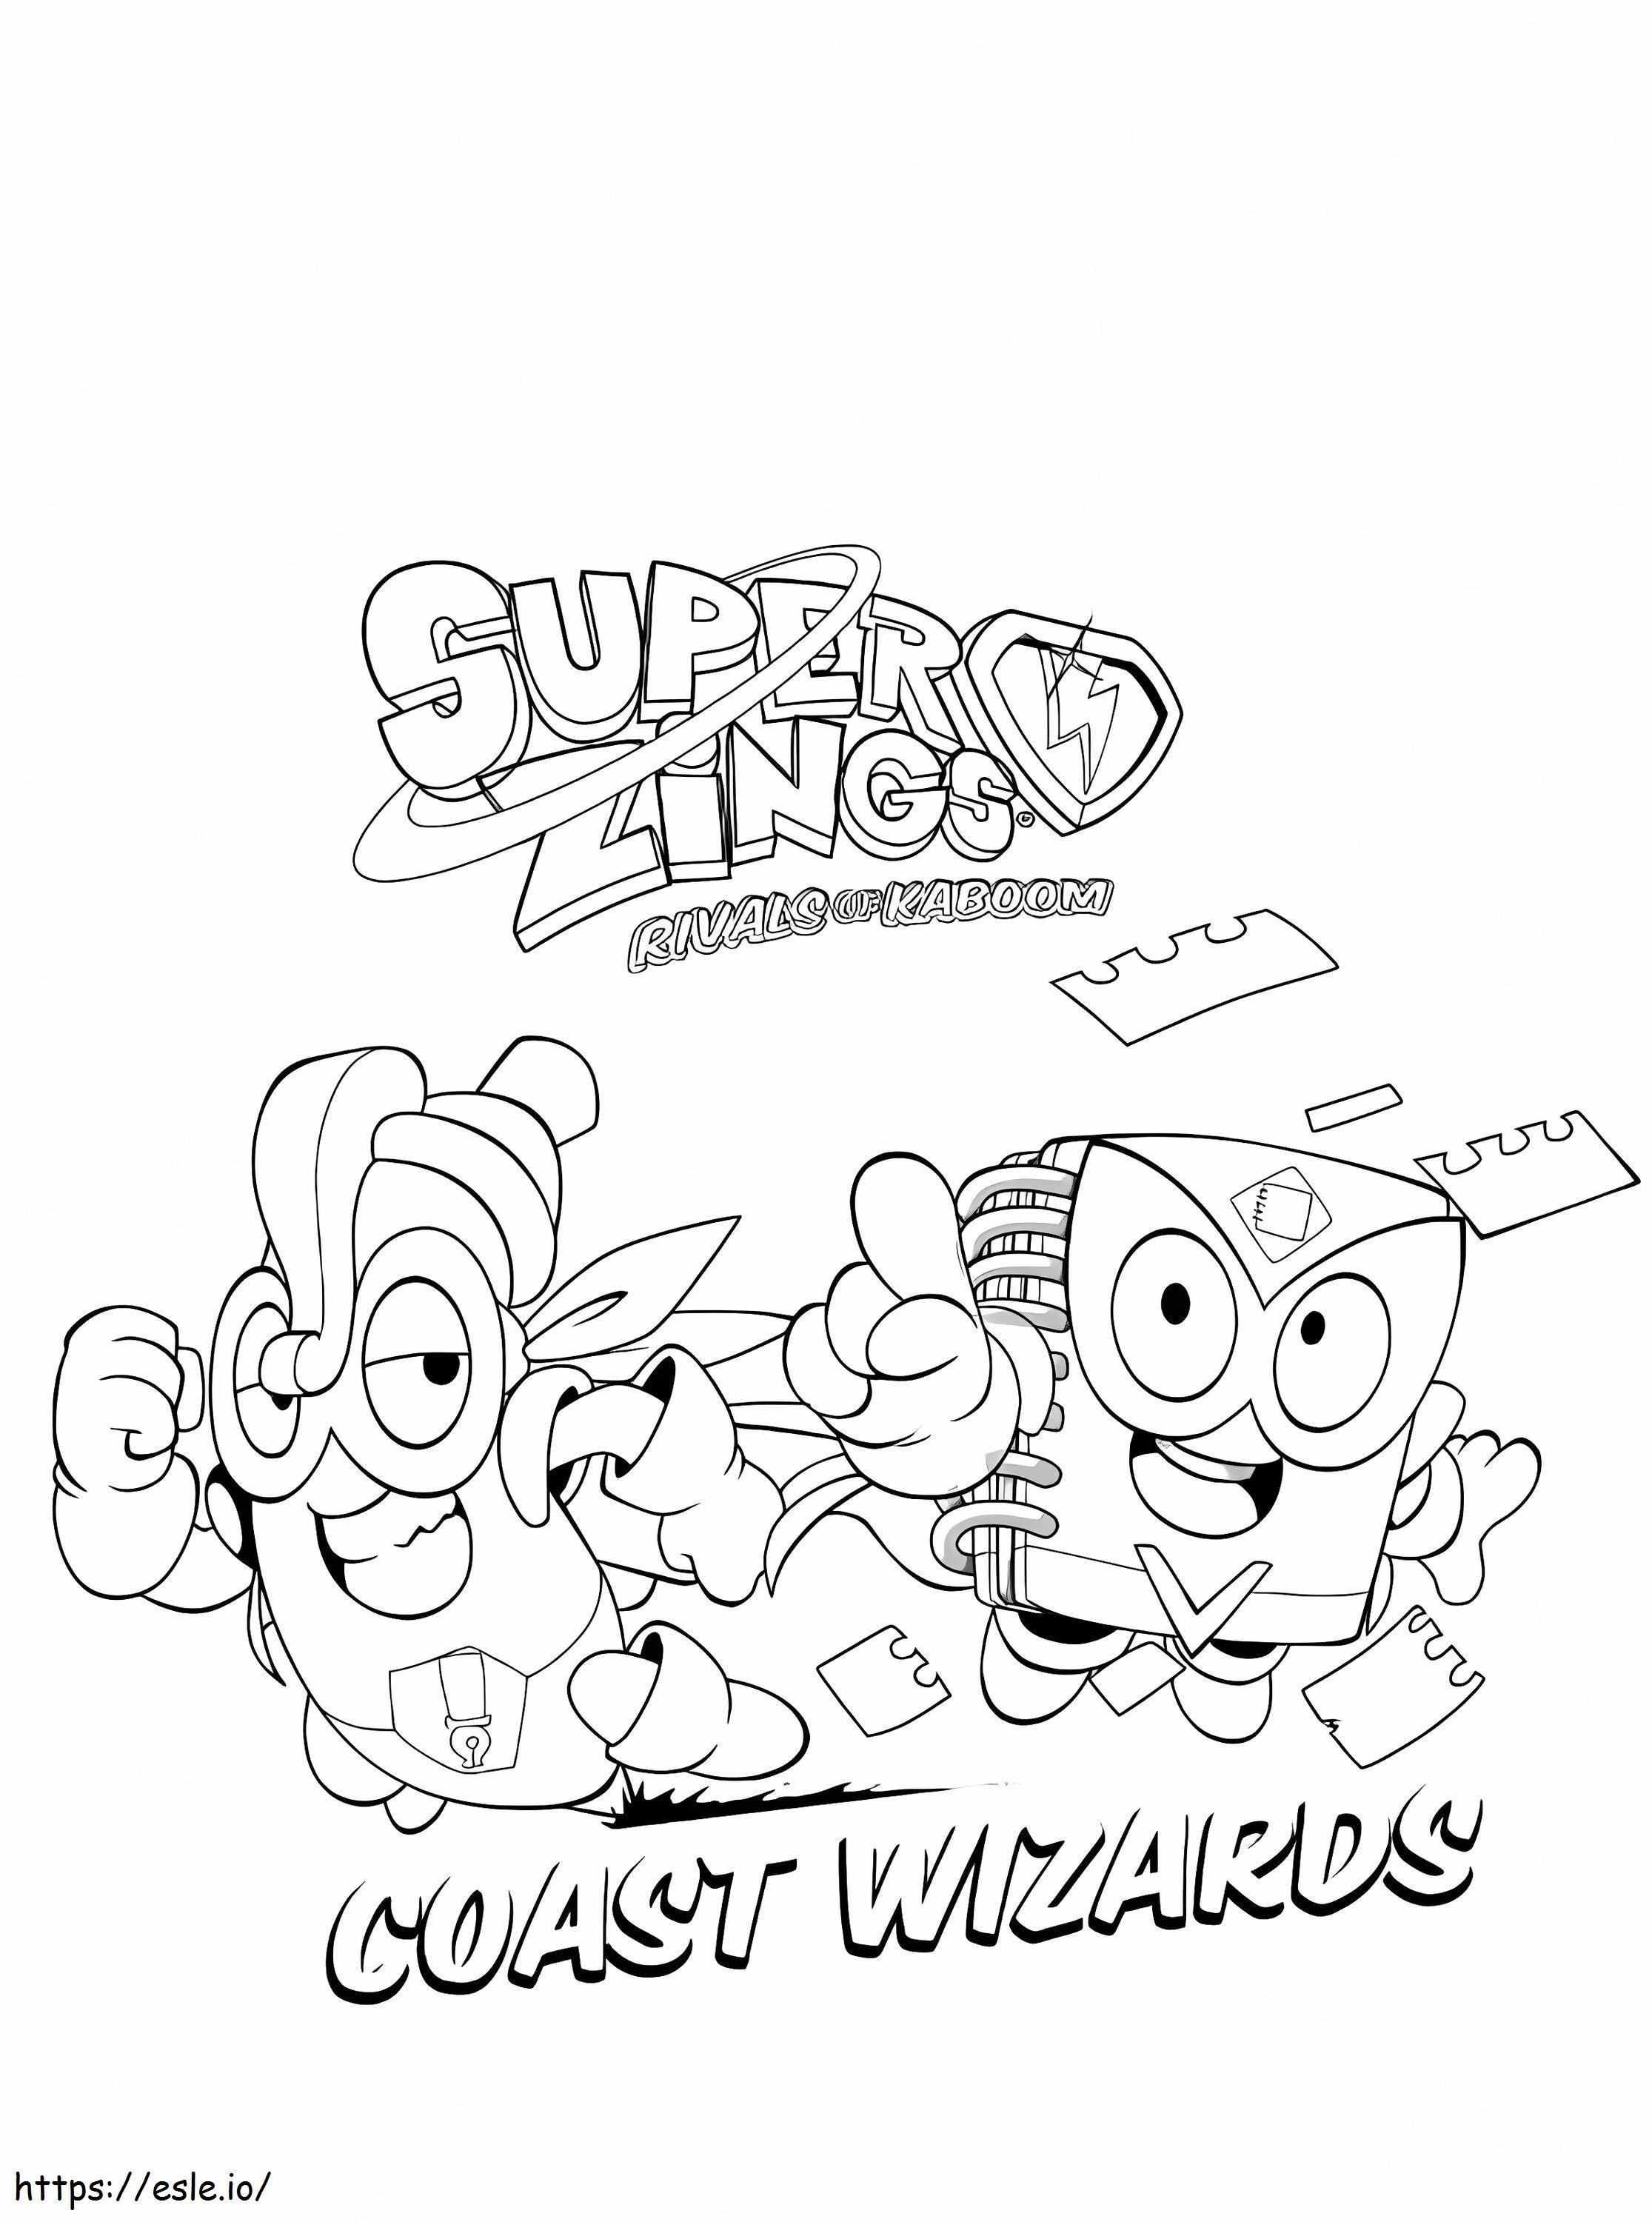 Coast Wizards Superzings coloring page